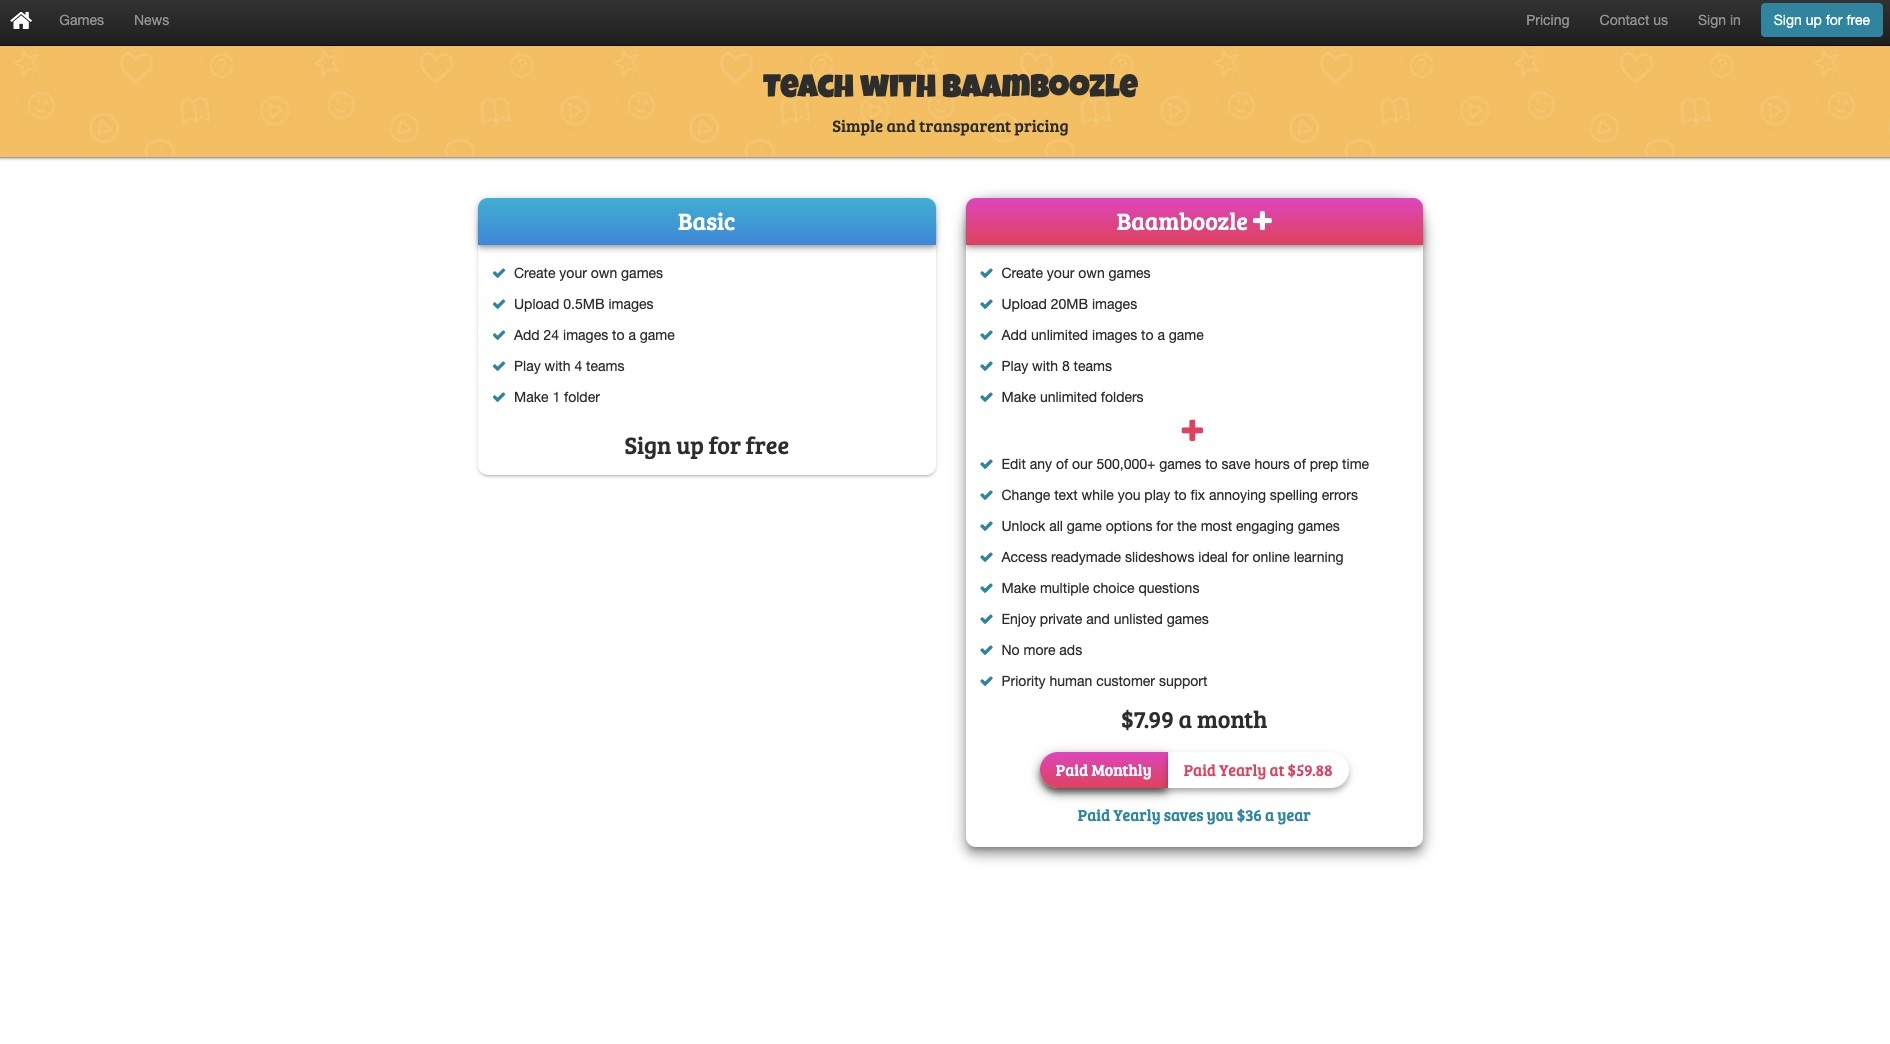 Find pricing, reviews and other details about Baamboozle